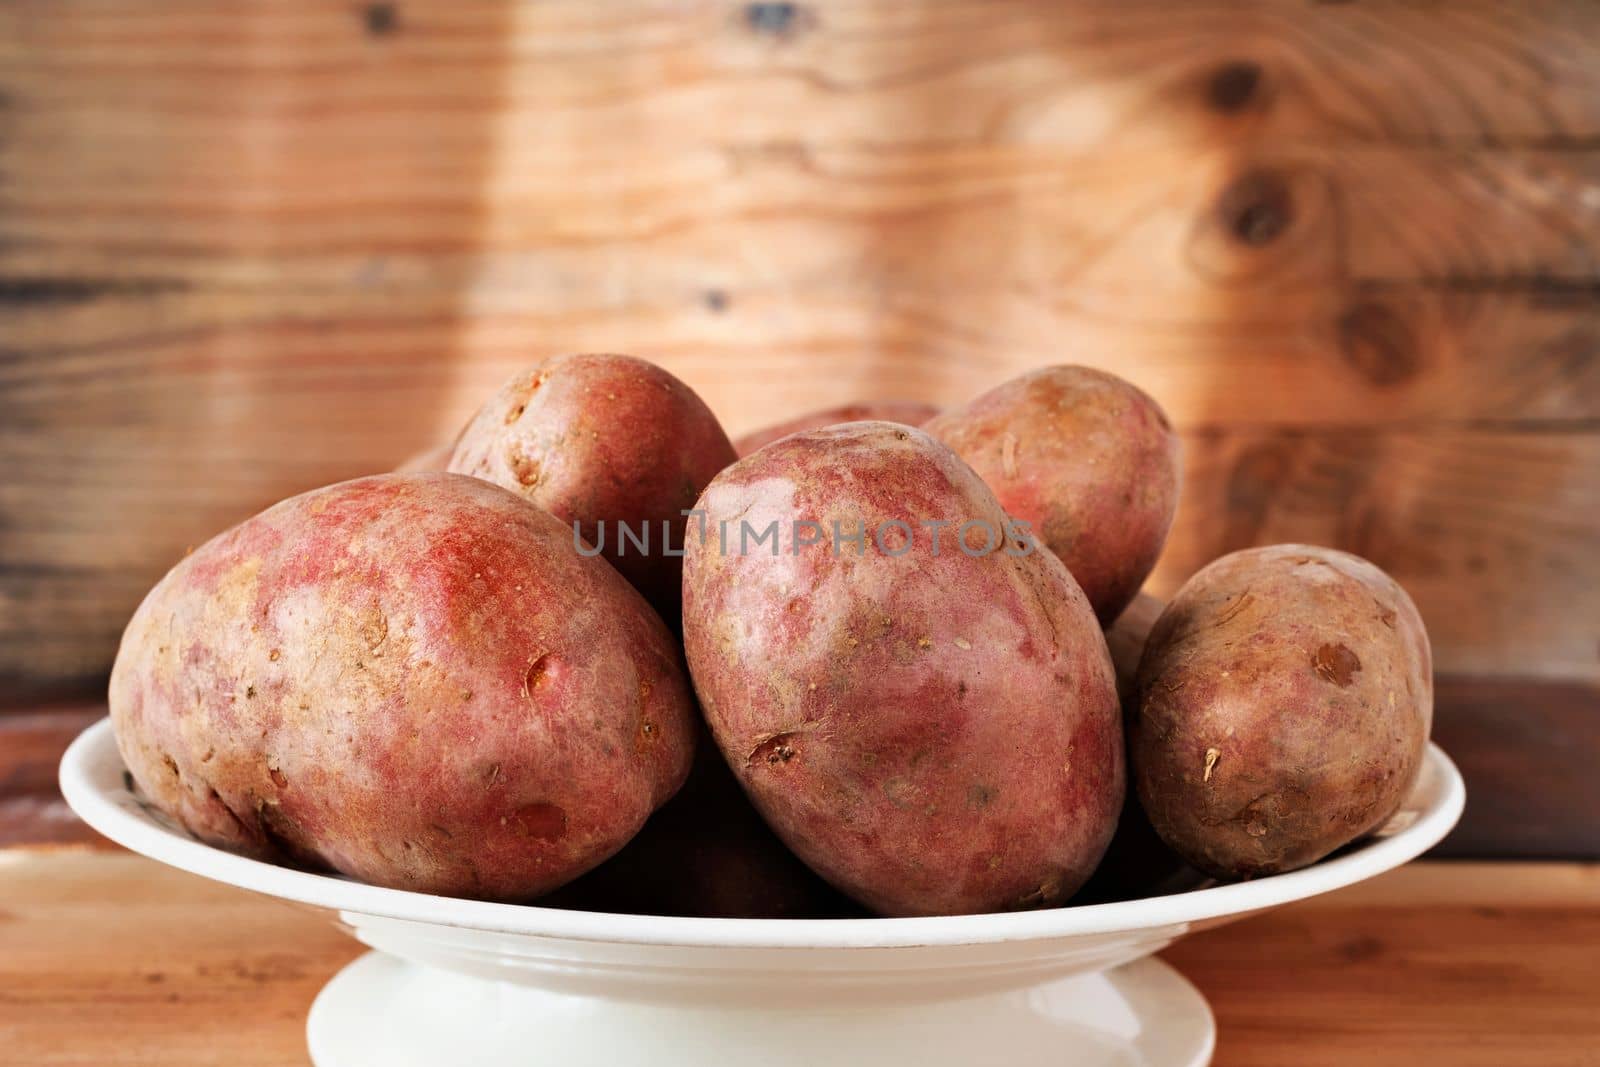 Harvested uncooked potatoes on plate, agricultural occupation